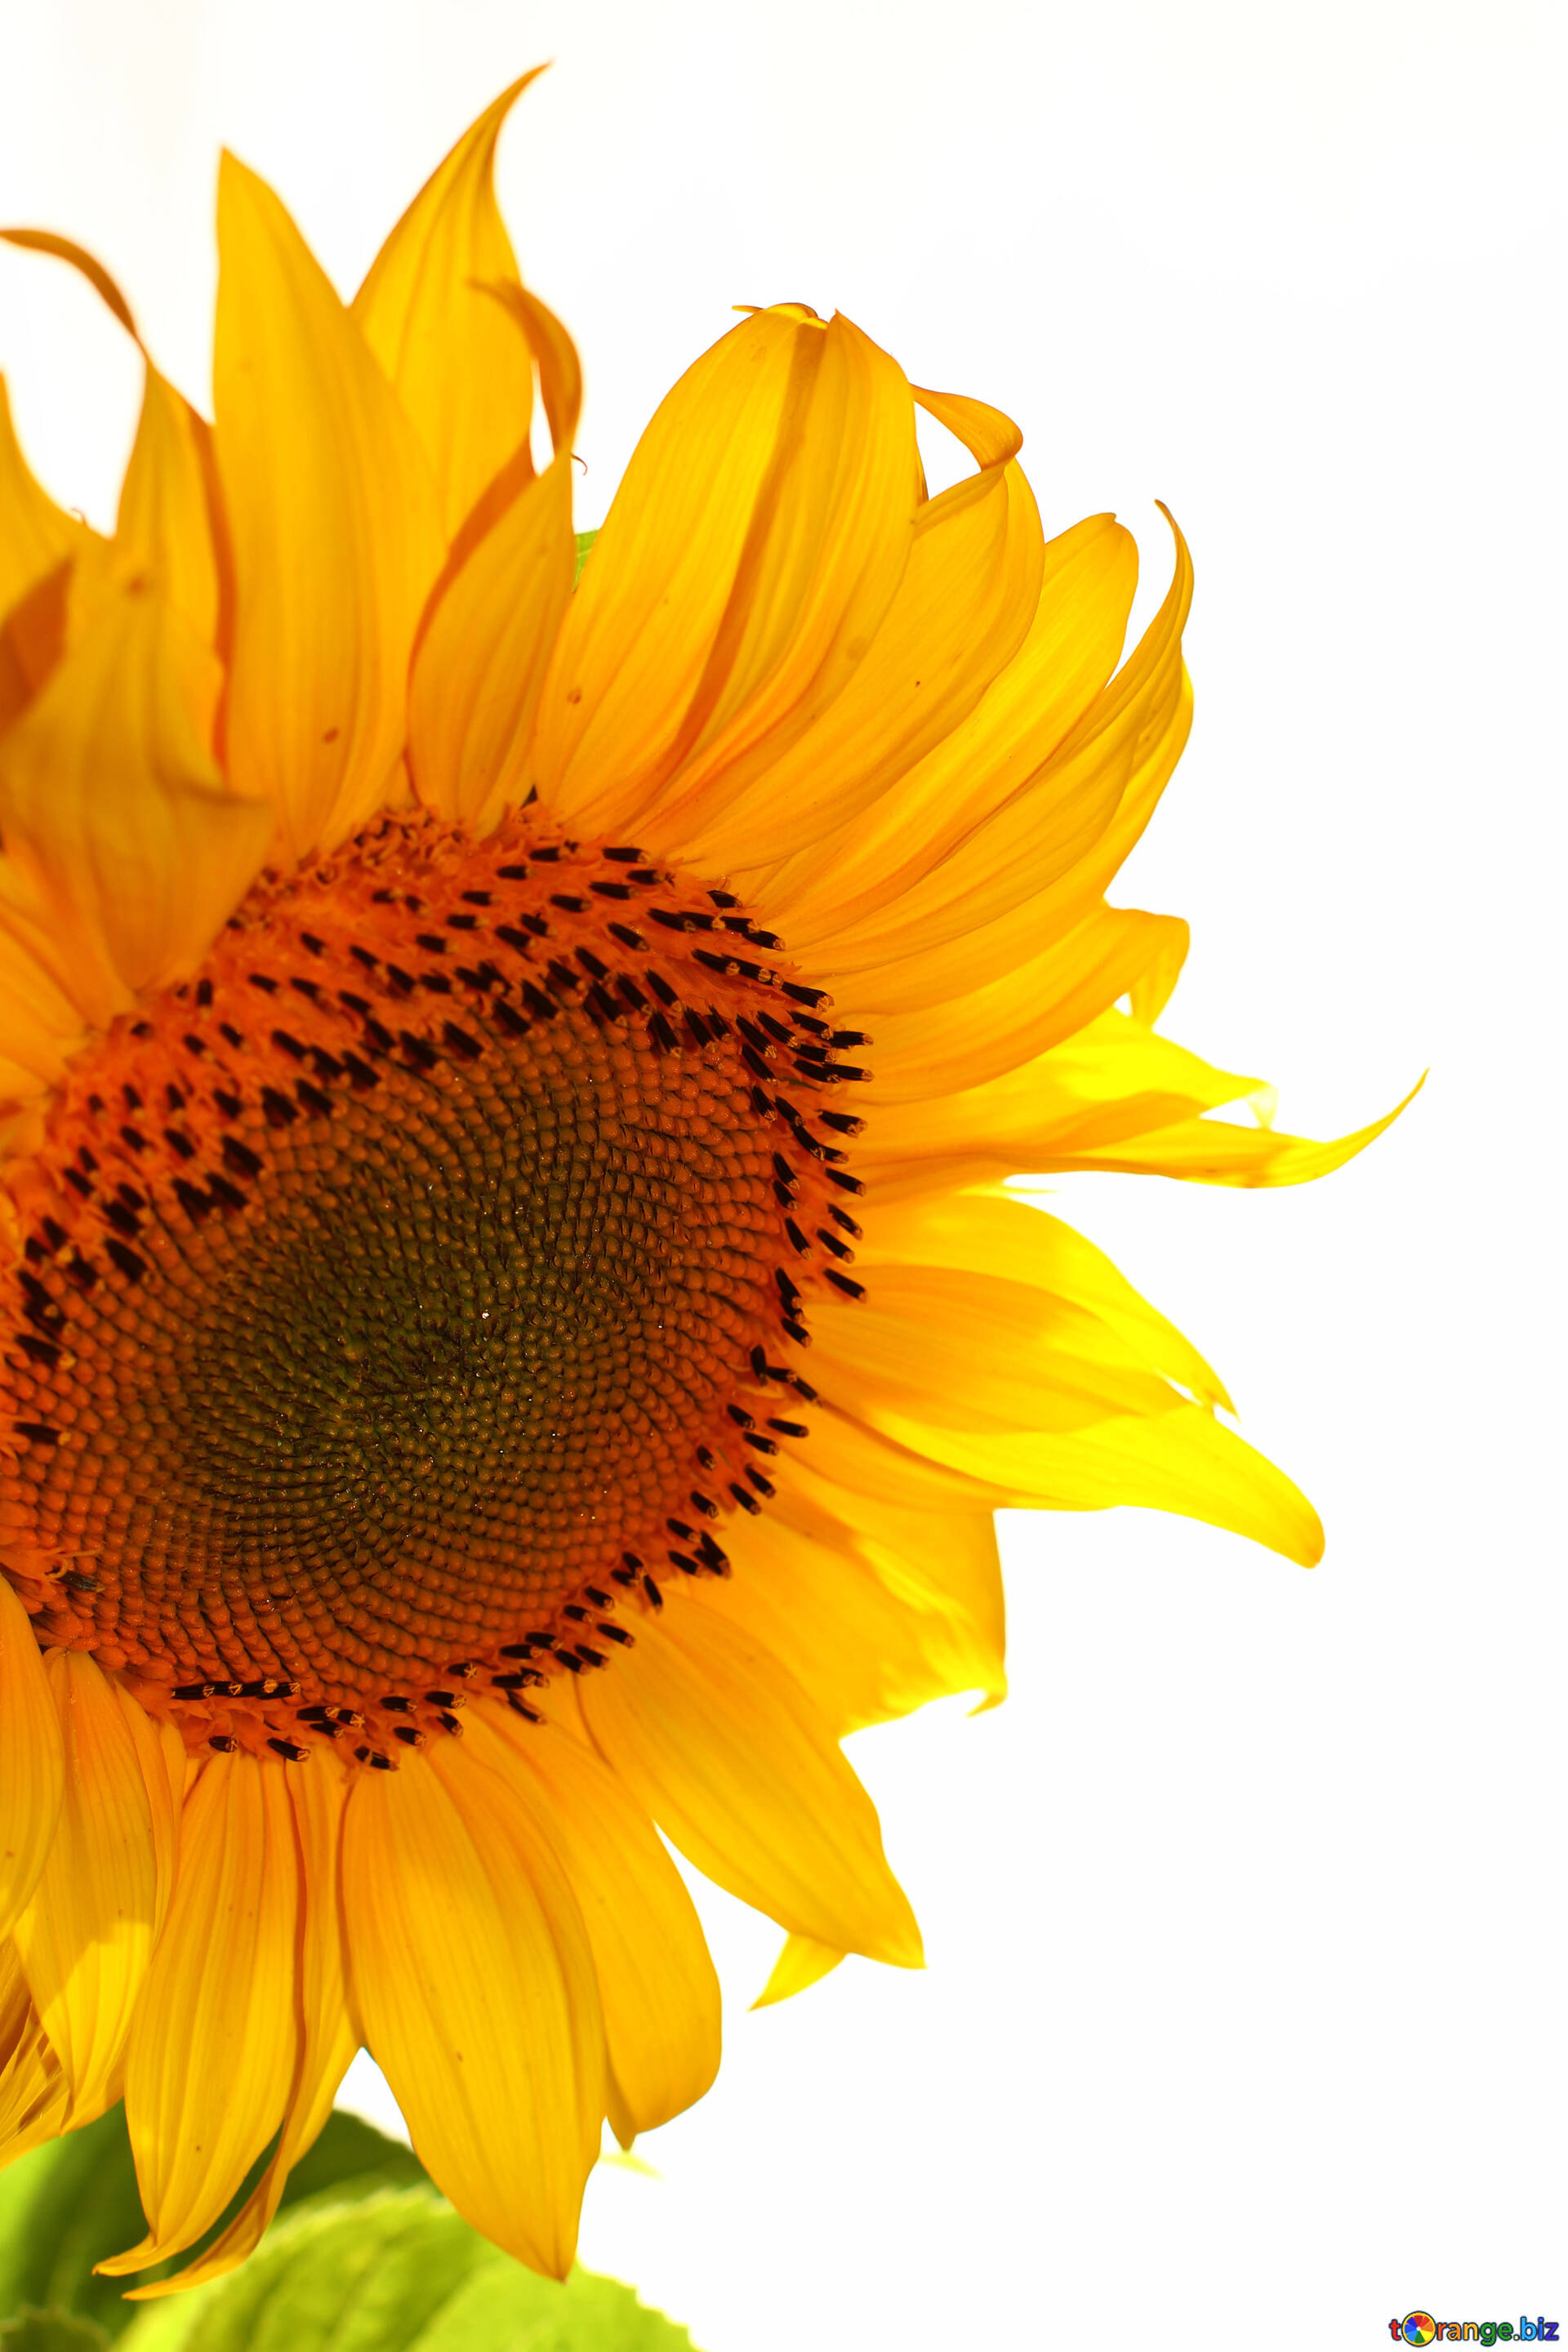 White background with sunflower on the side free image - № 32763